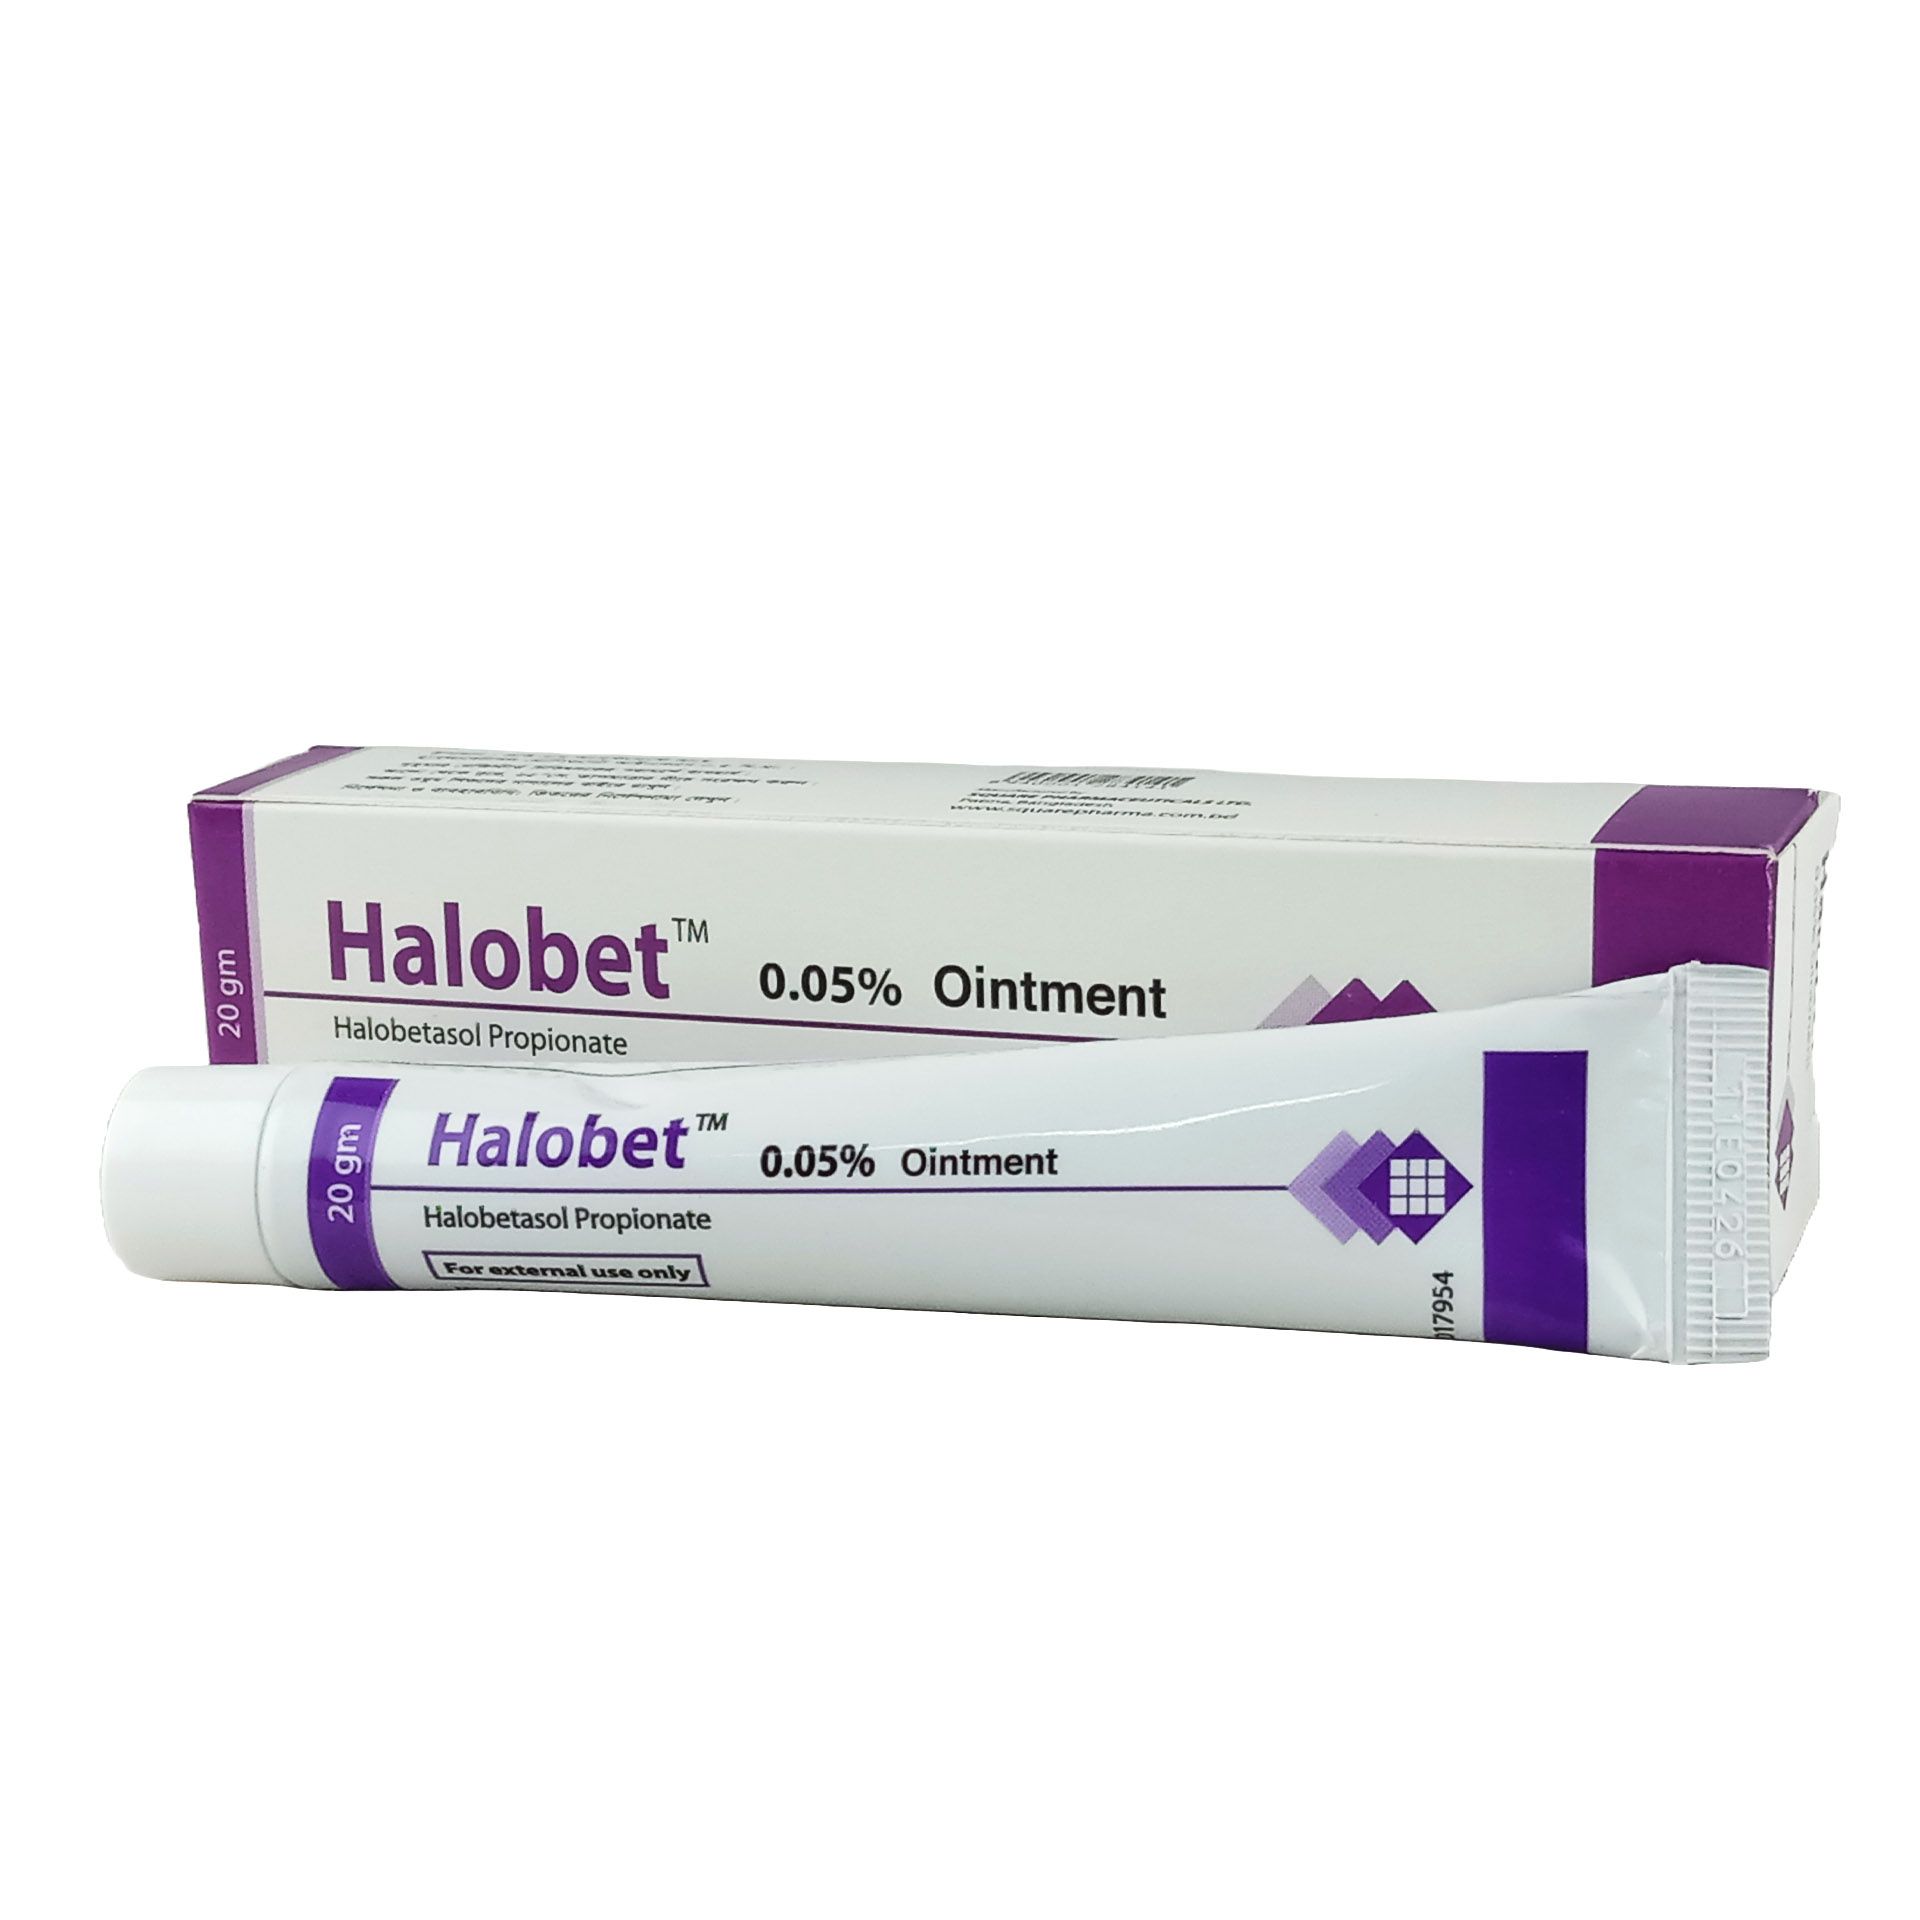 Halobet Ointment 0.05% Ointment